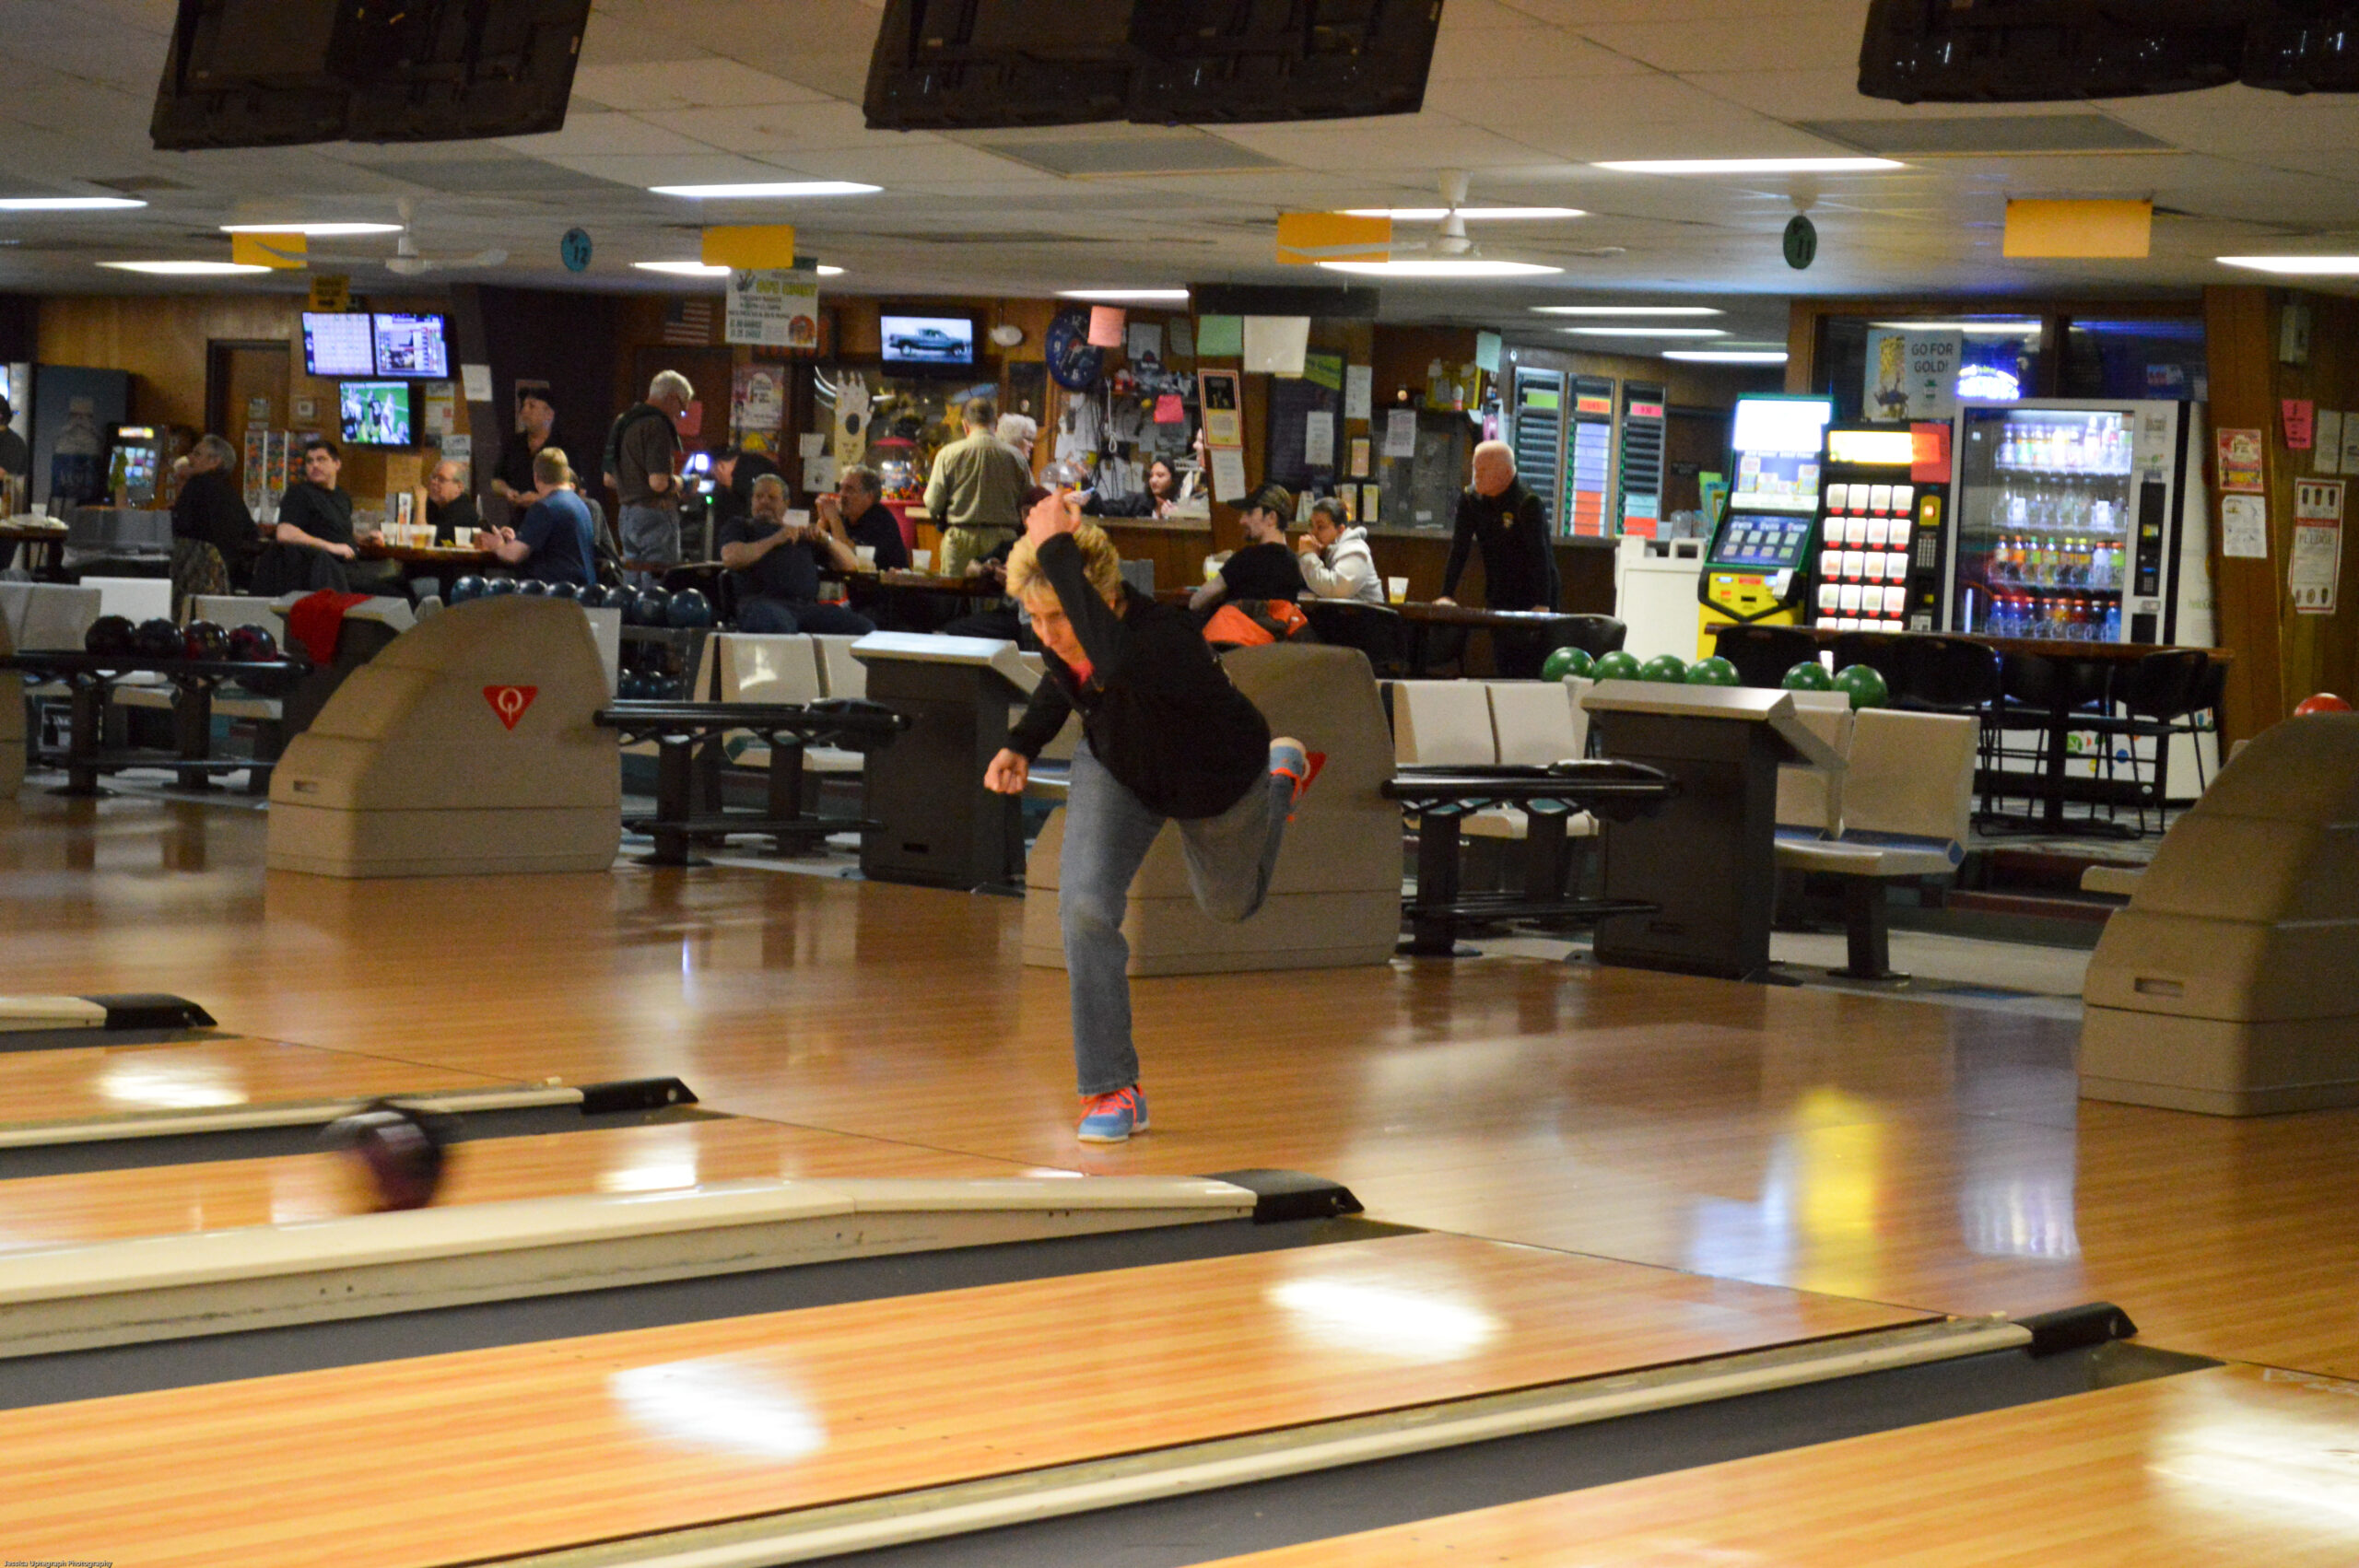 Strike Up The Fun! 10 Reasons to Plan Your Next Party at a Bowling Center